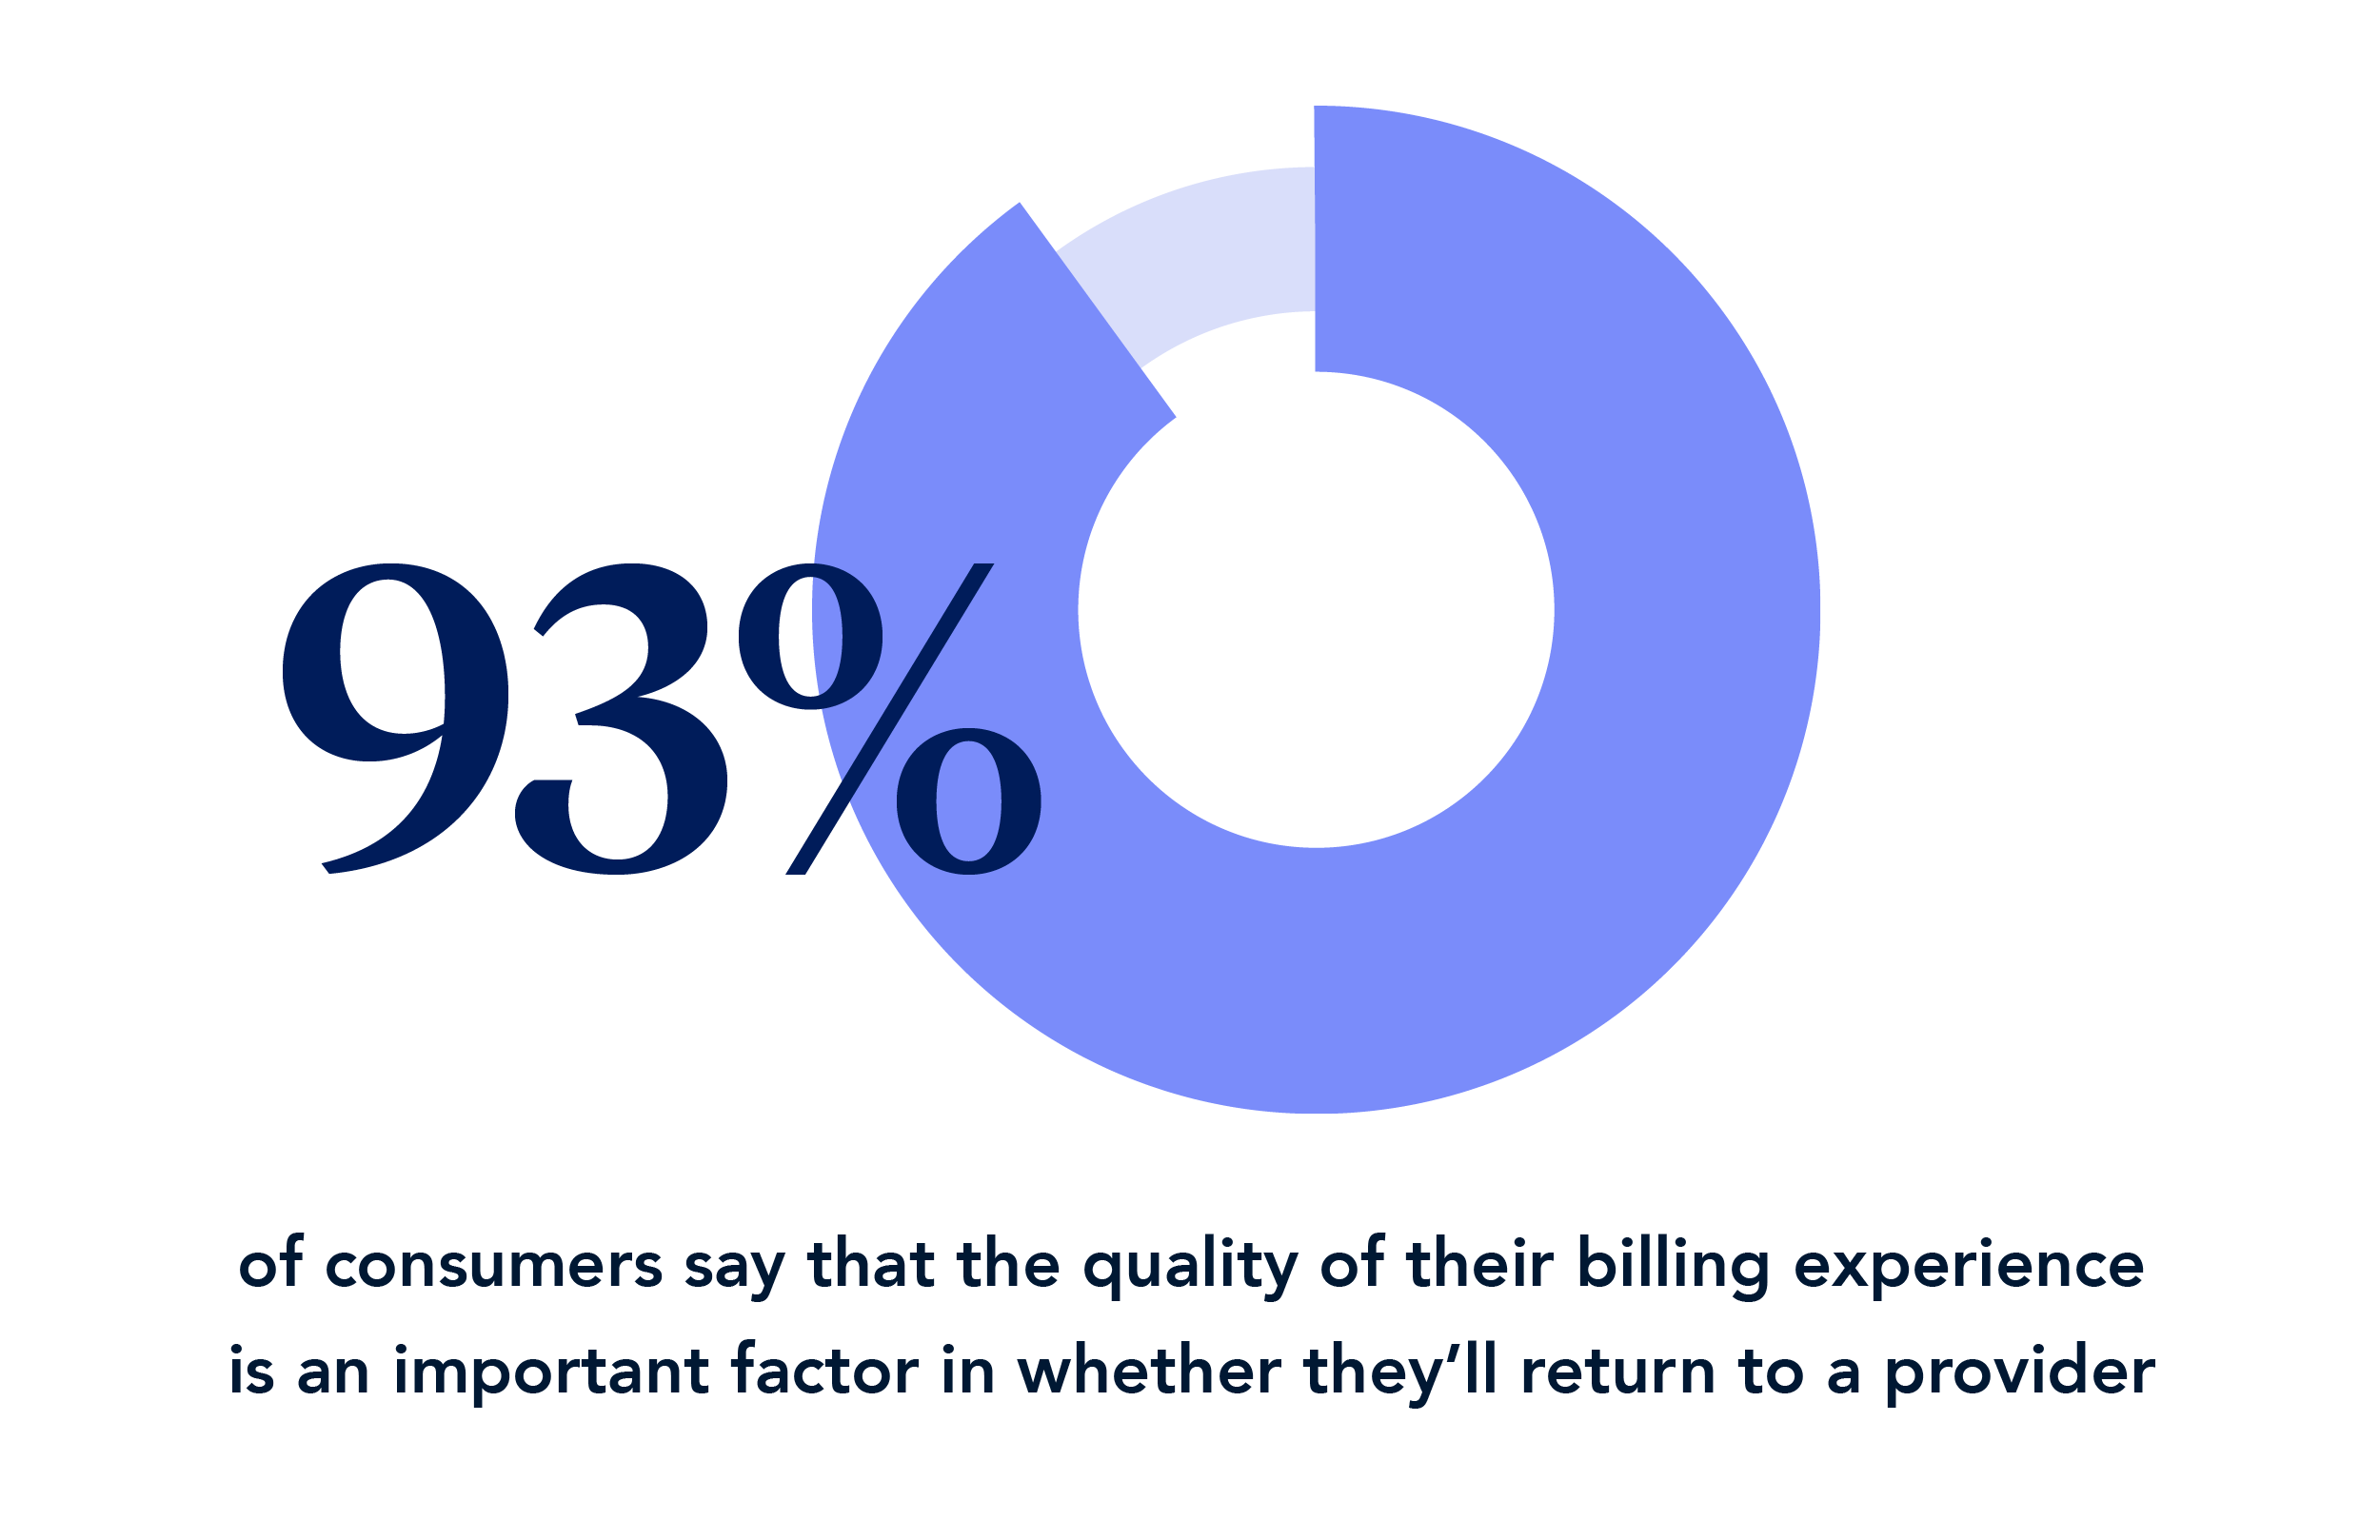 Statistic: 93% of consumers say that the quality of their billing experience is an important factor in whether they'll return to a provider